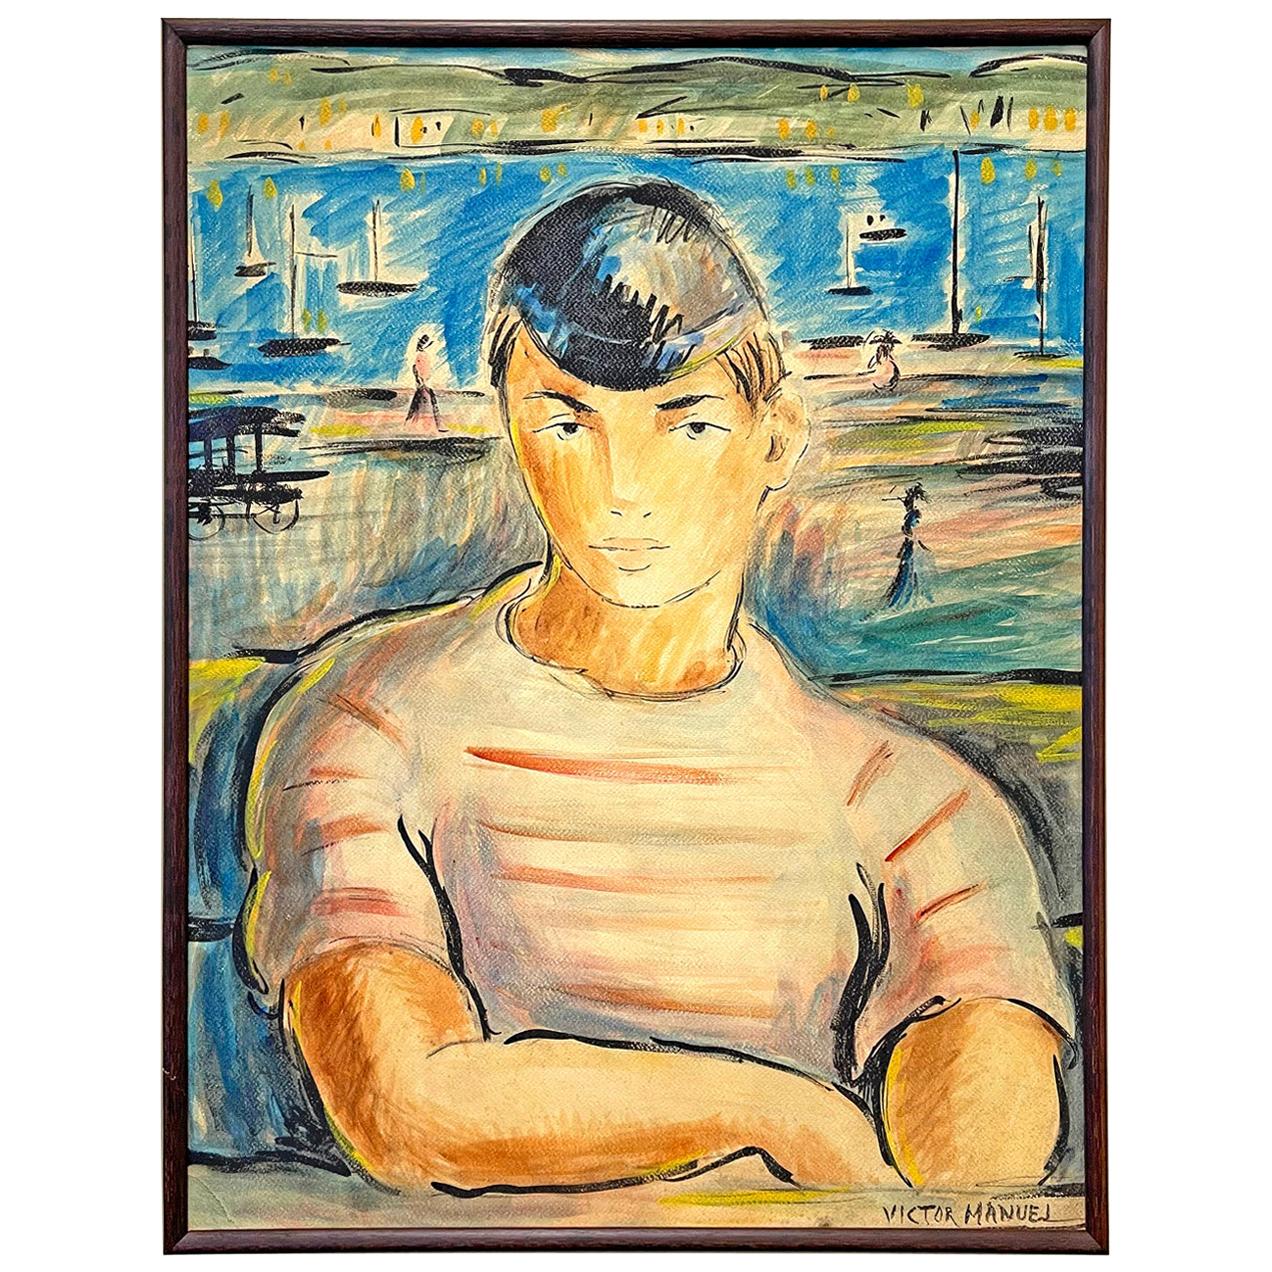 "Young Man in Striped Shirt, " Portrait with Harbor Scene by Cuban Artist